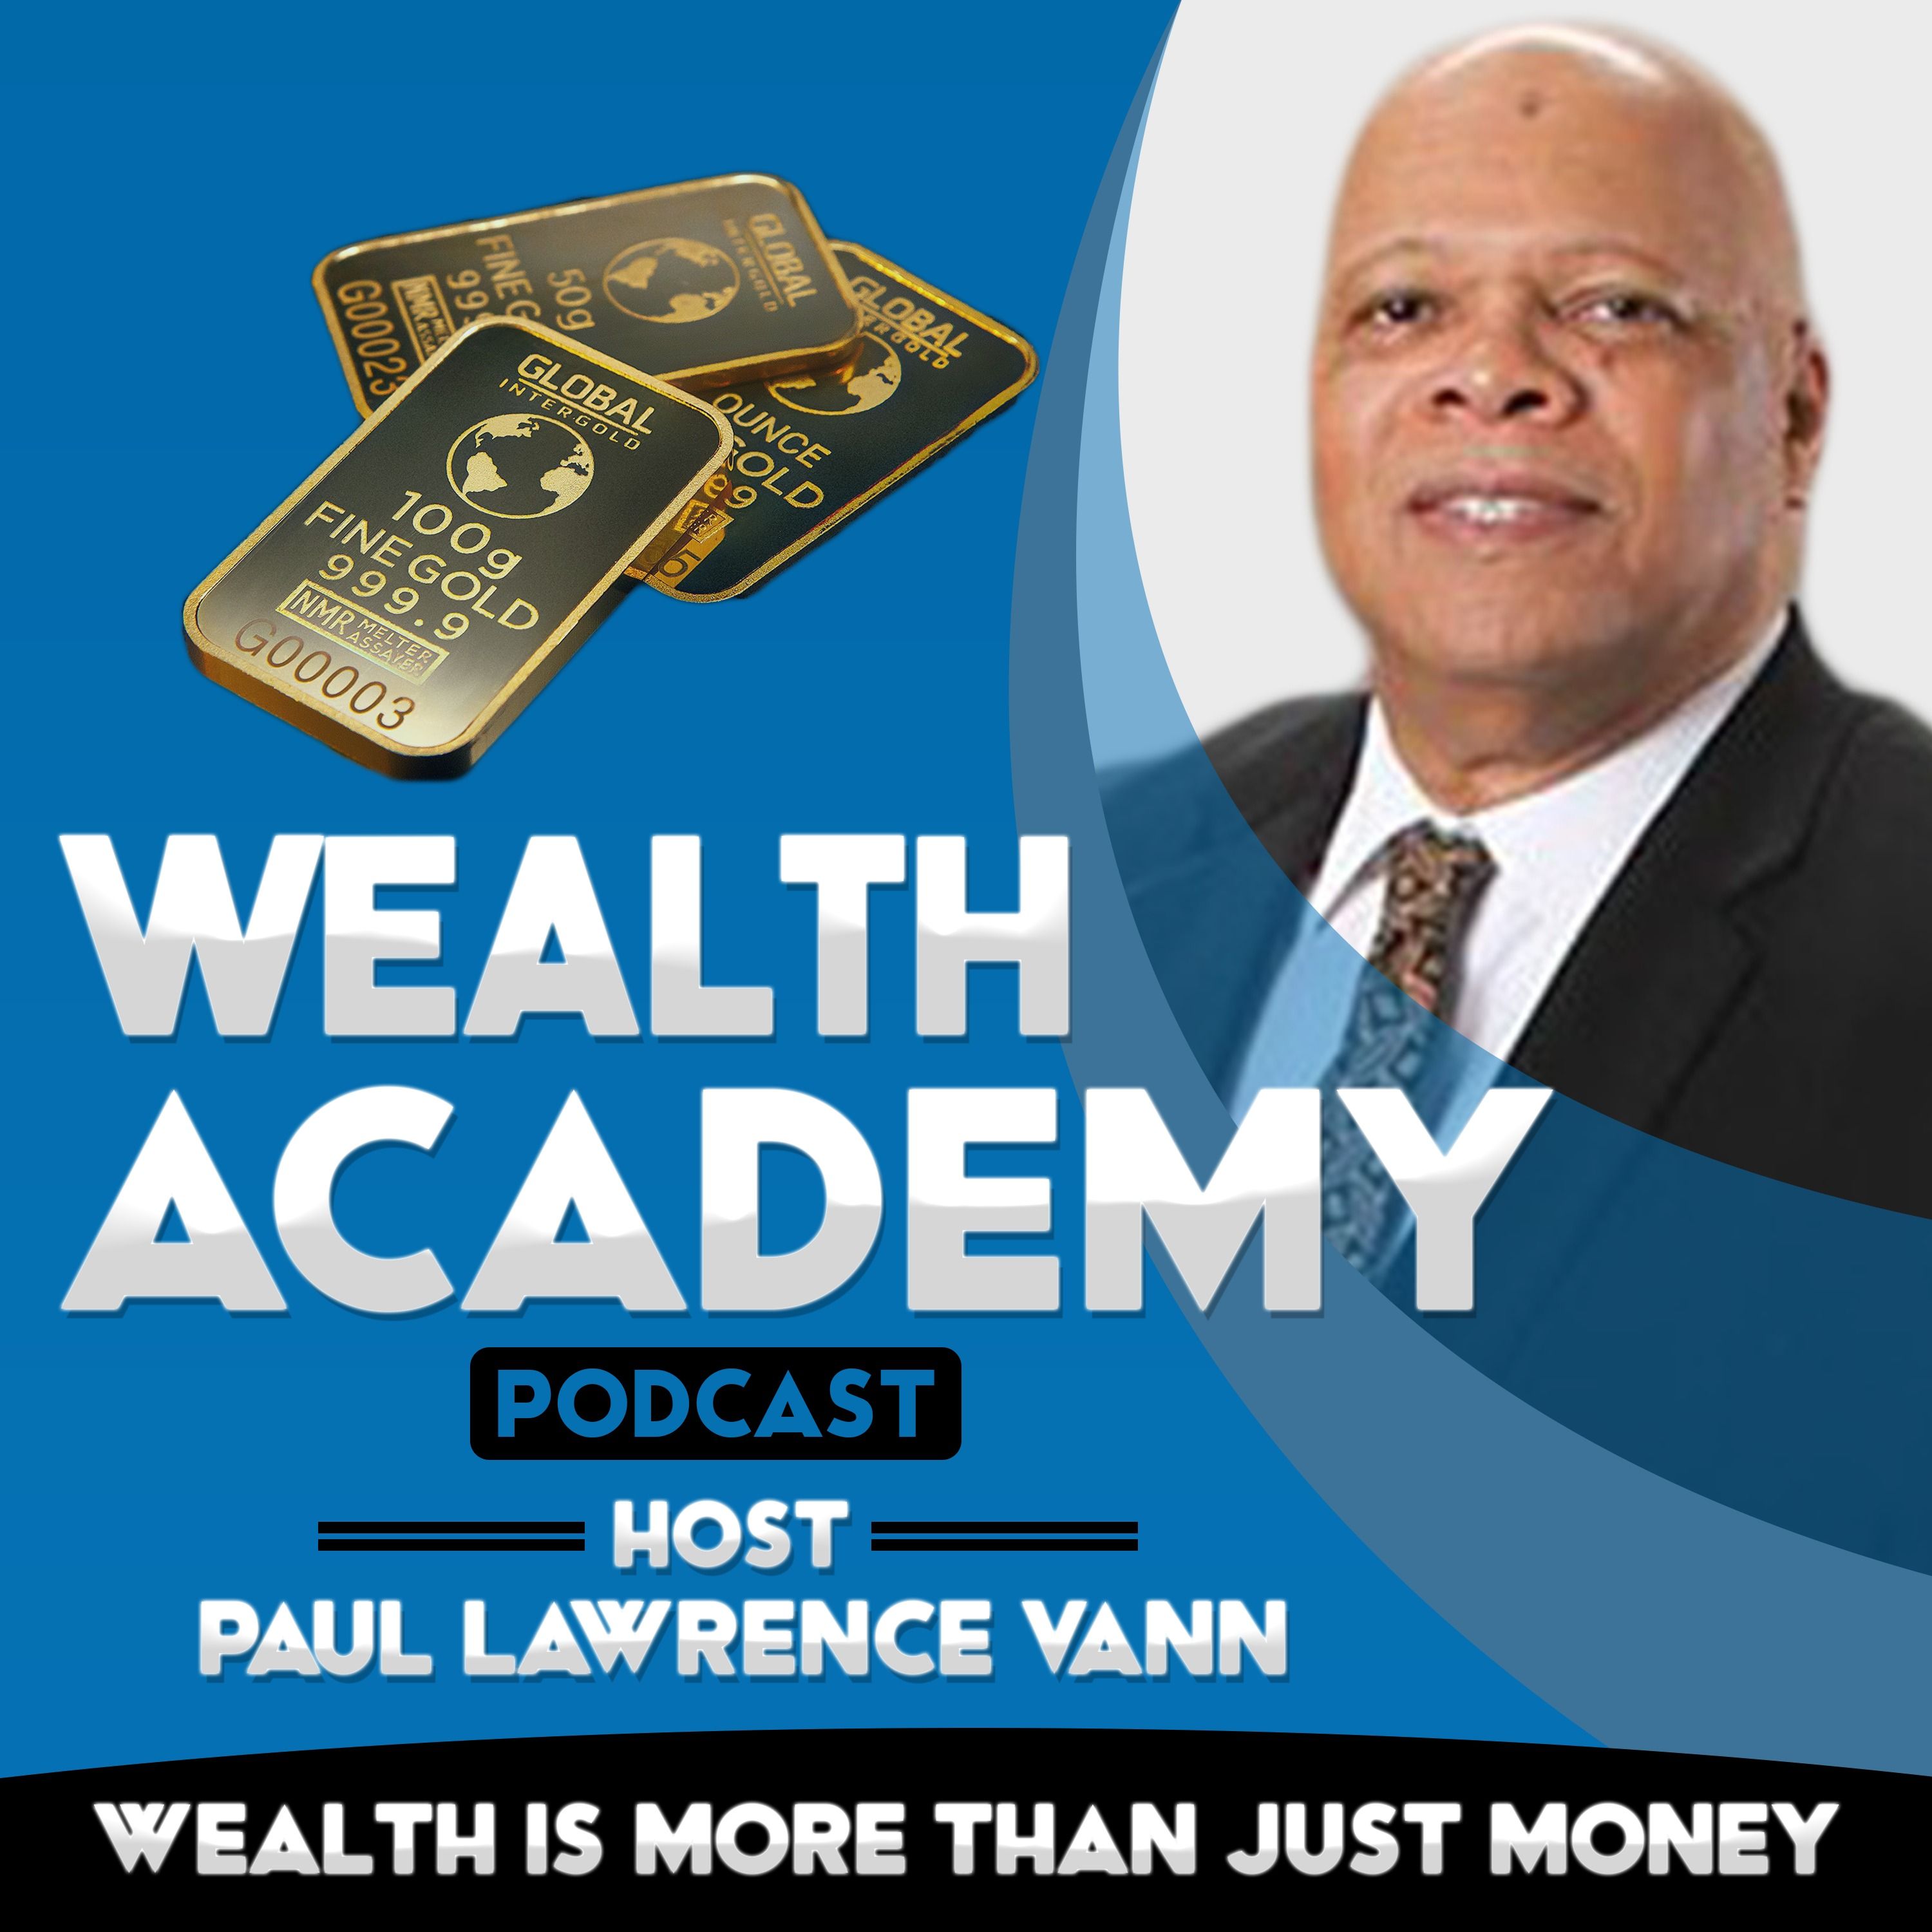 Wealth Academy Podcast - Wealth Is More Than Just Moneyhttps://www.linkedin.com/in/paullawrencevann